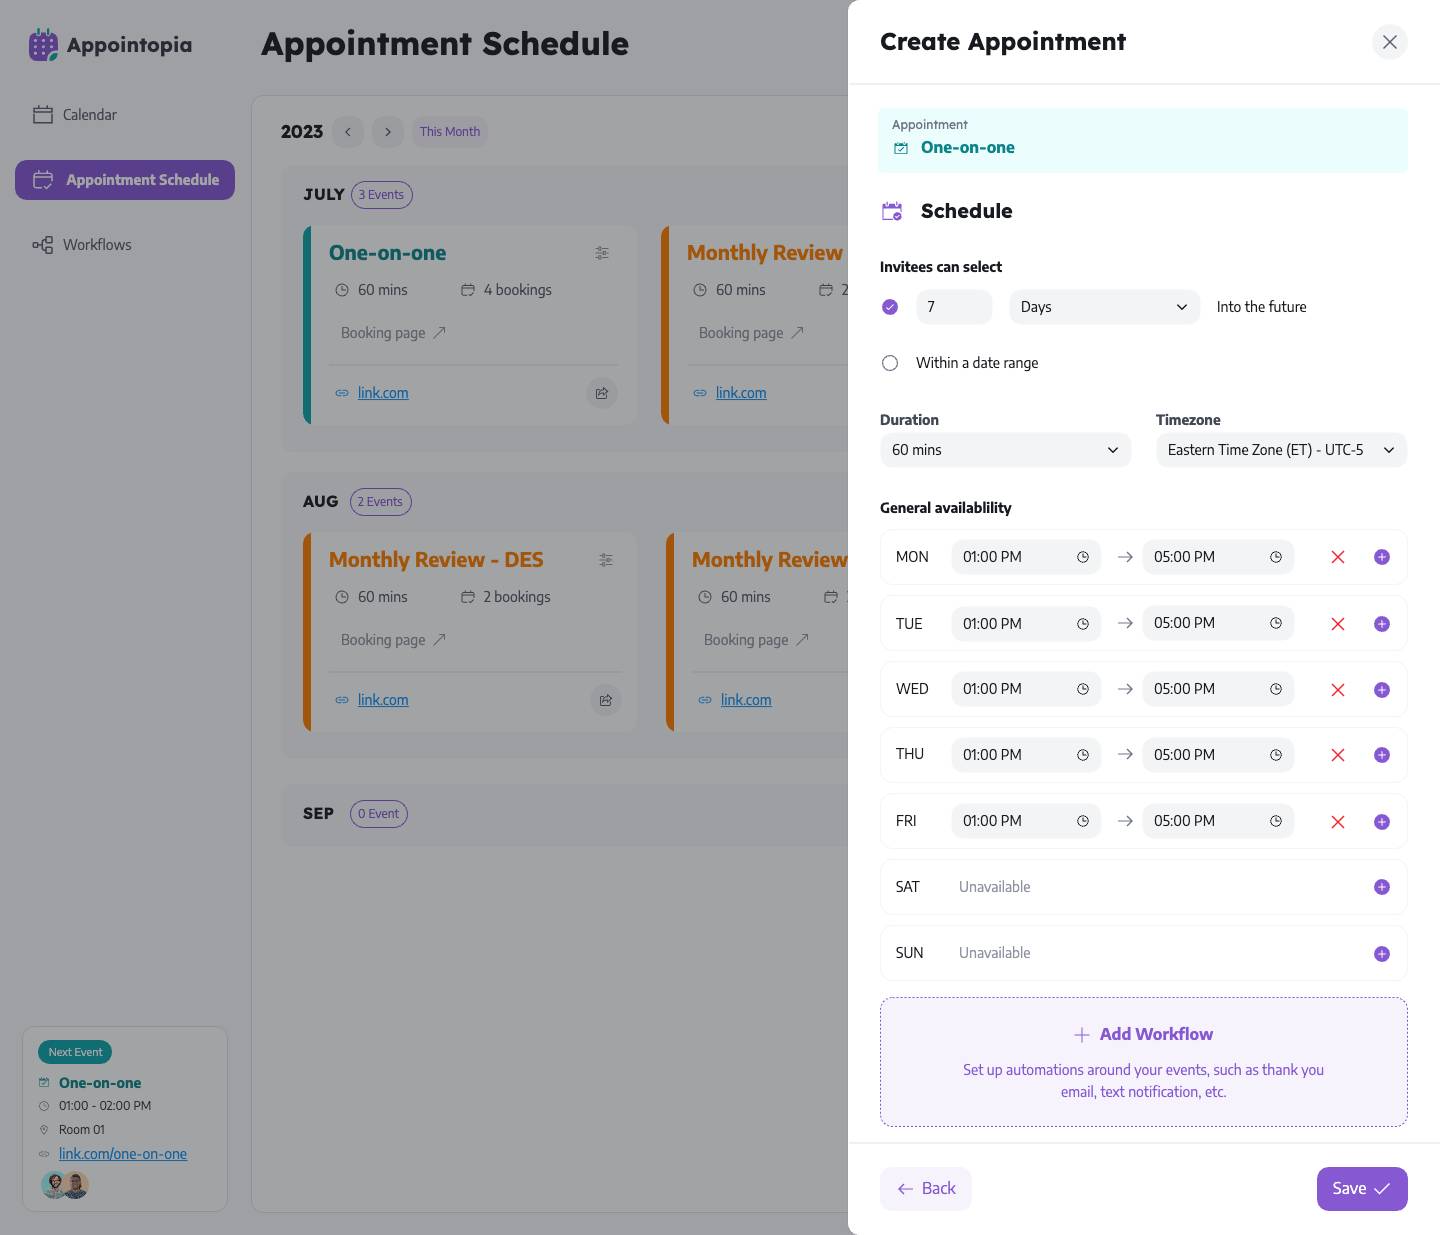 Create an appointment - Available schedules